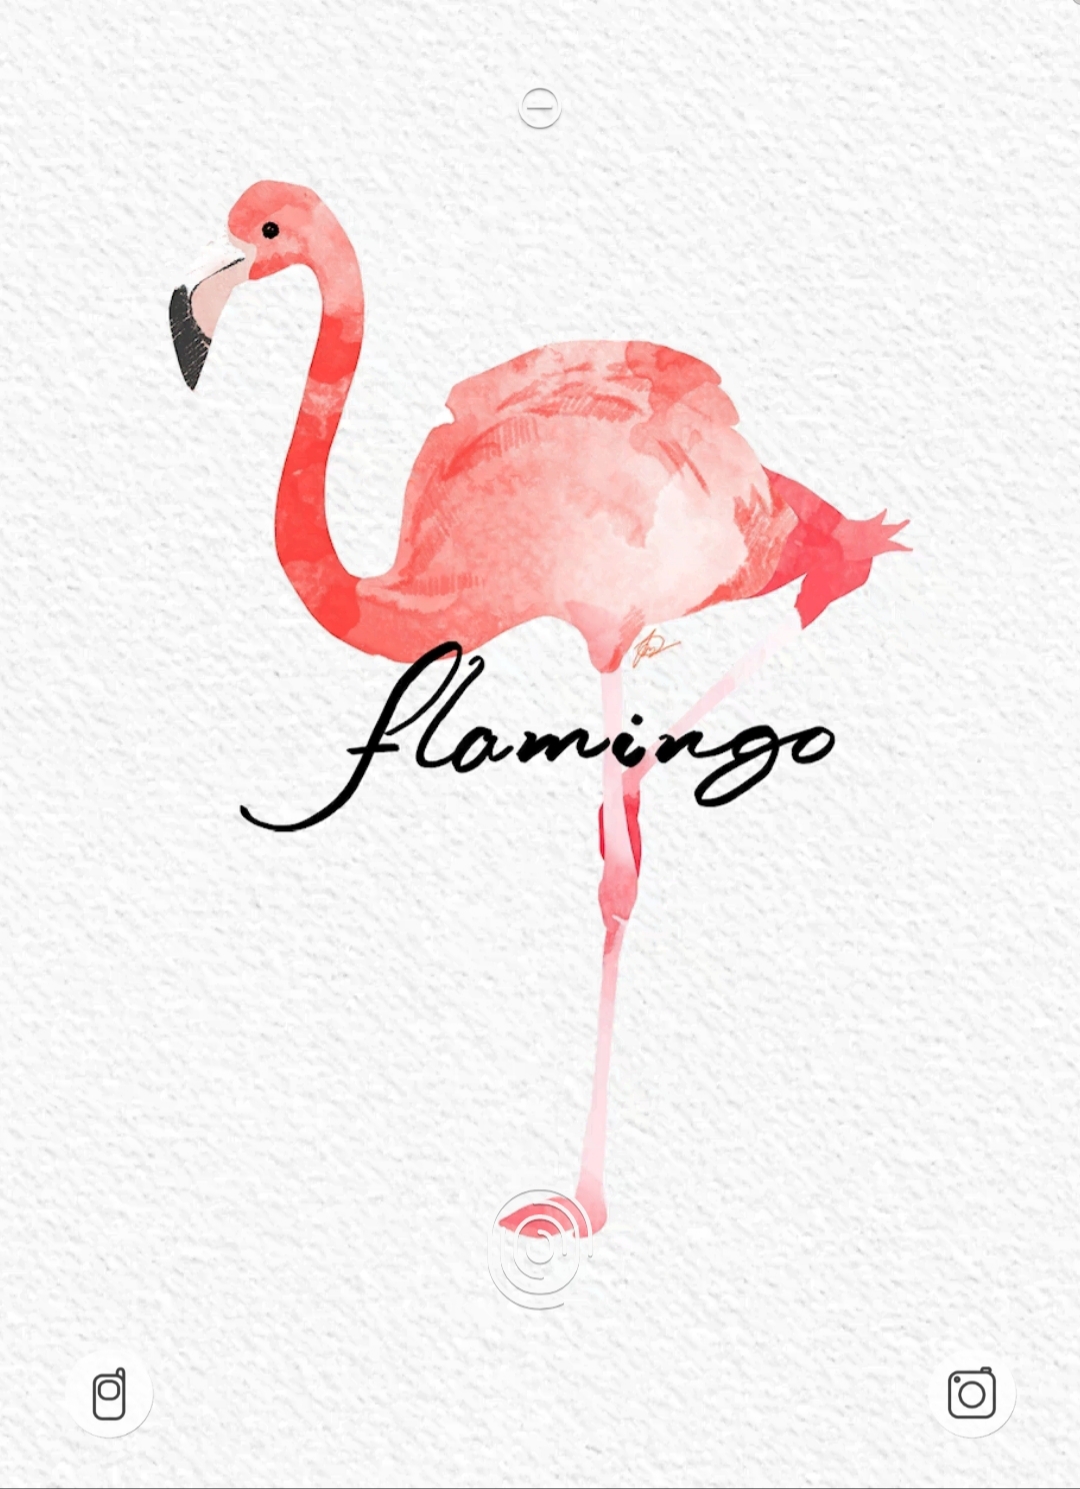 What font is "flamingo"? Thanks